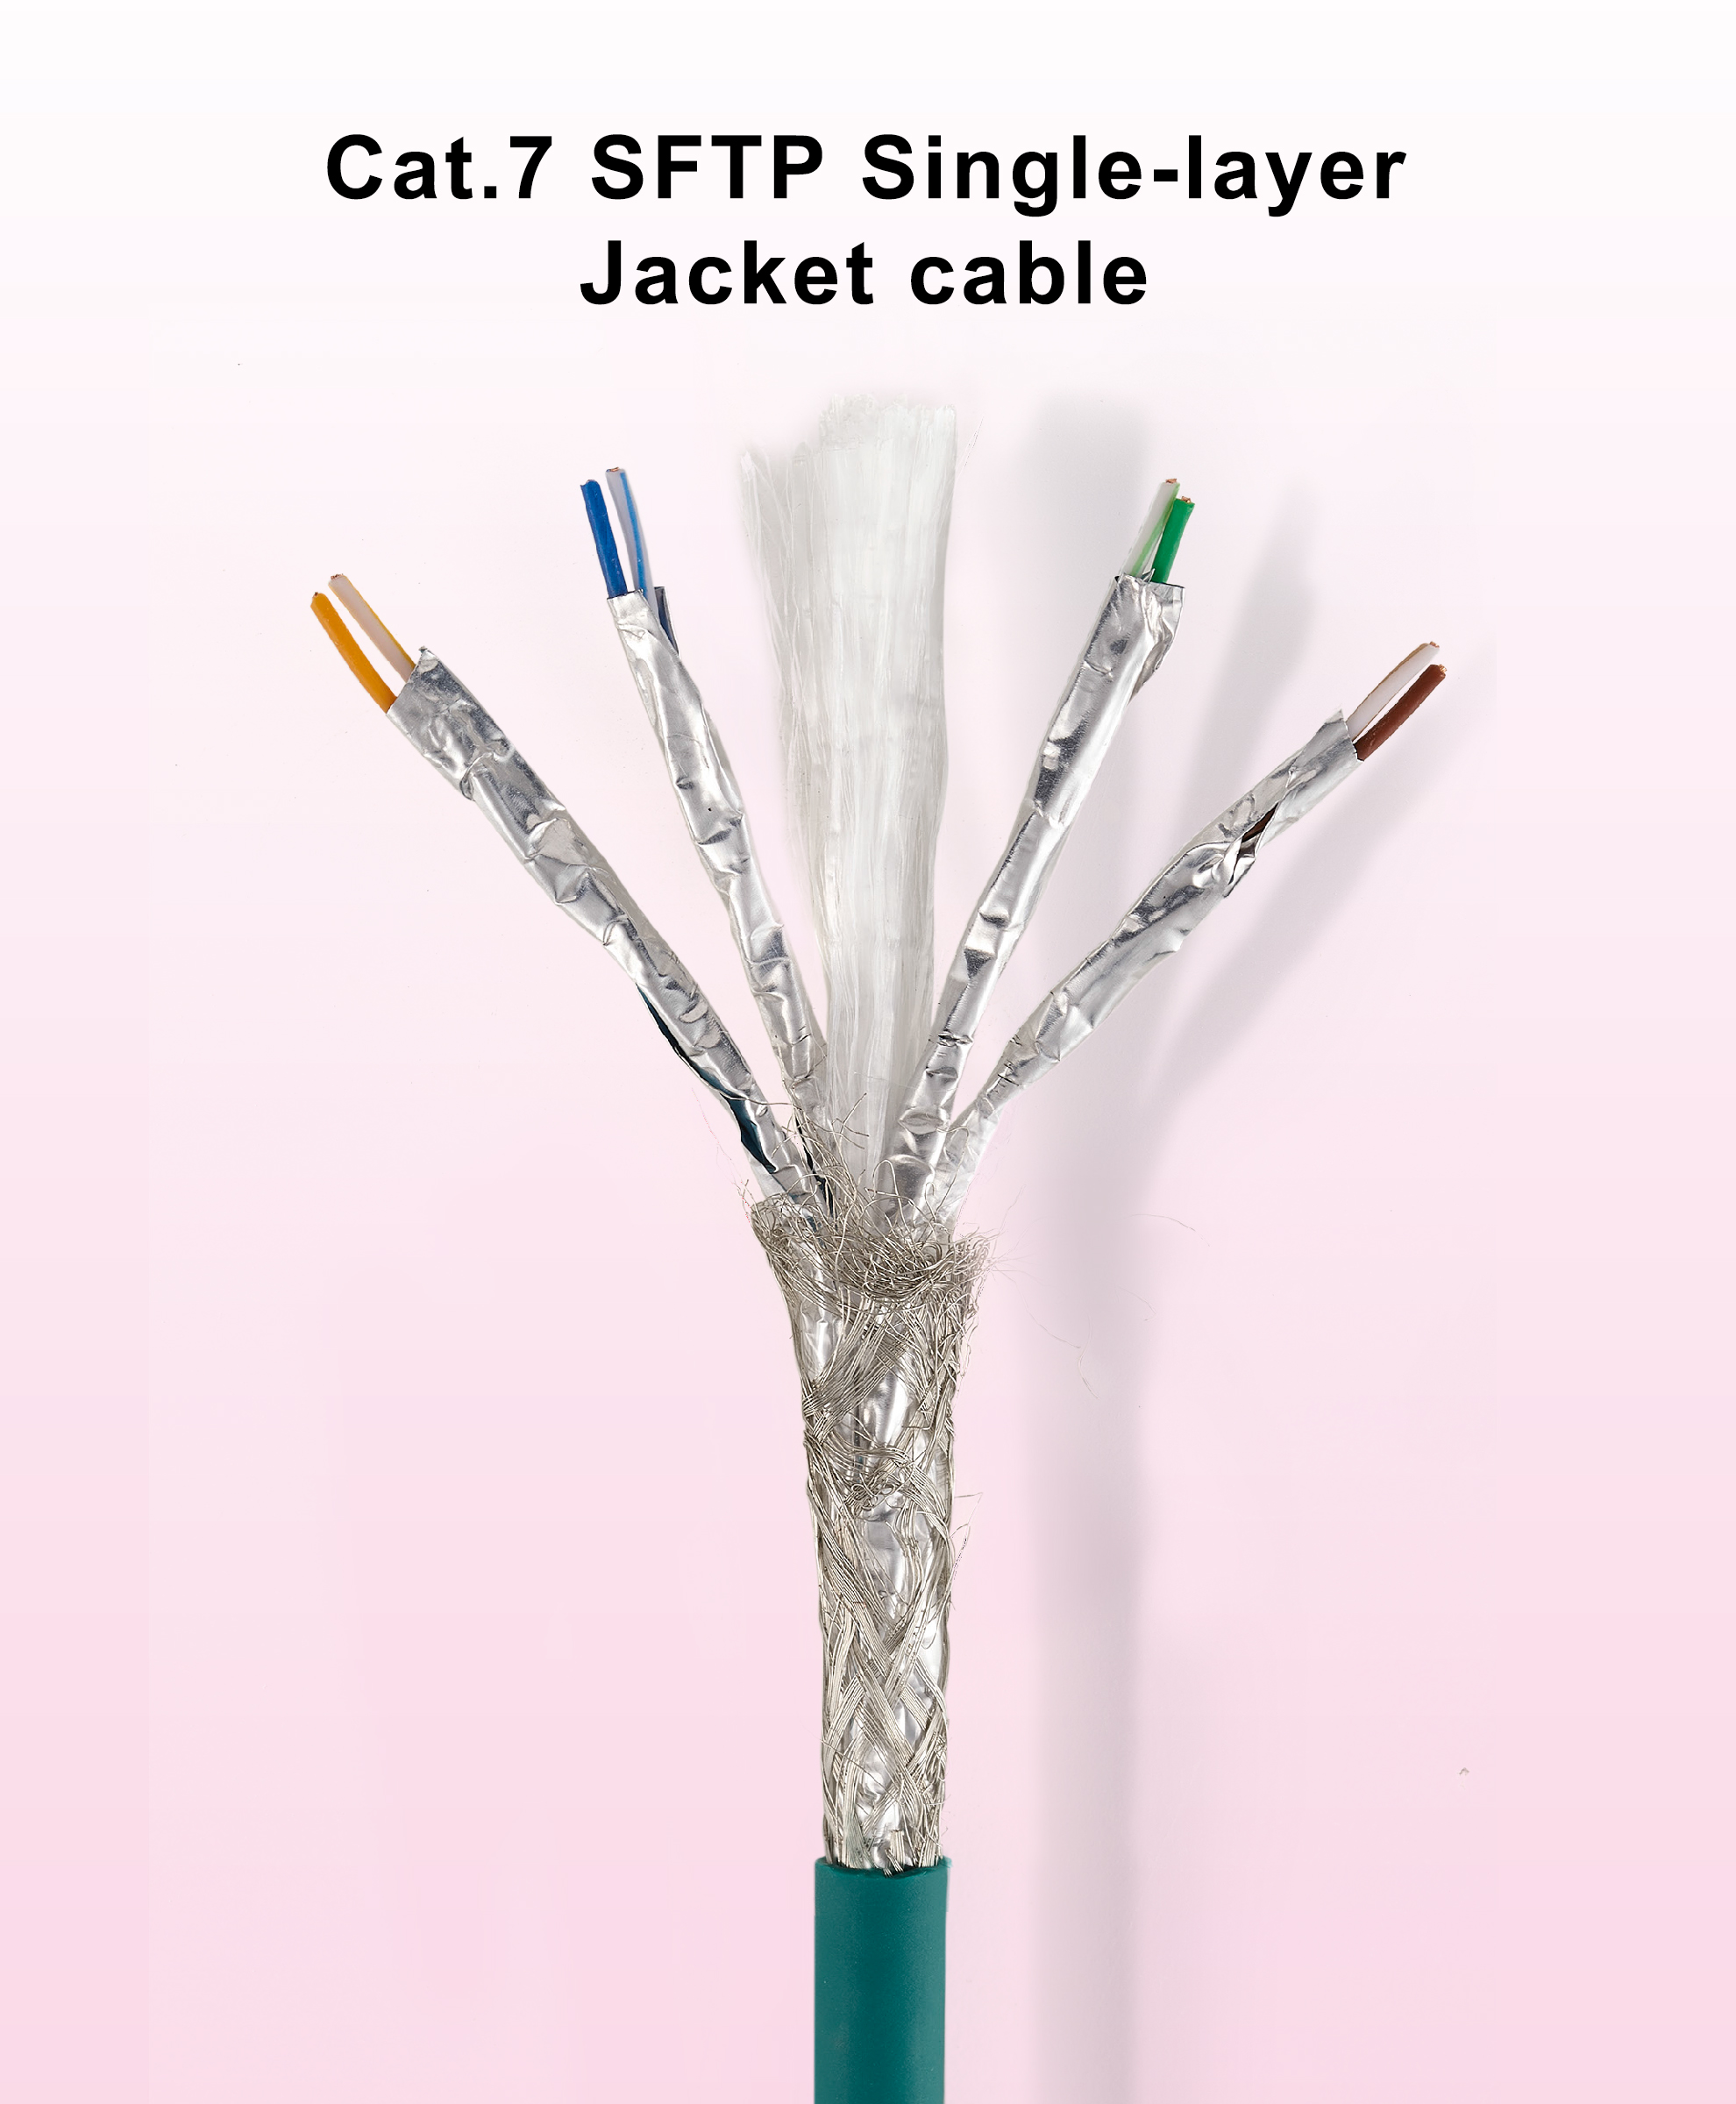 NEX1 Cat.7 S-FTP Stranded Single Jacket Cable - 1